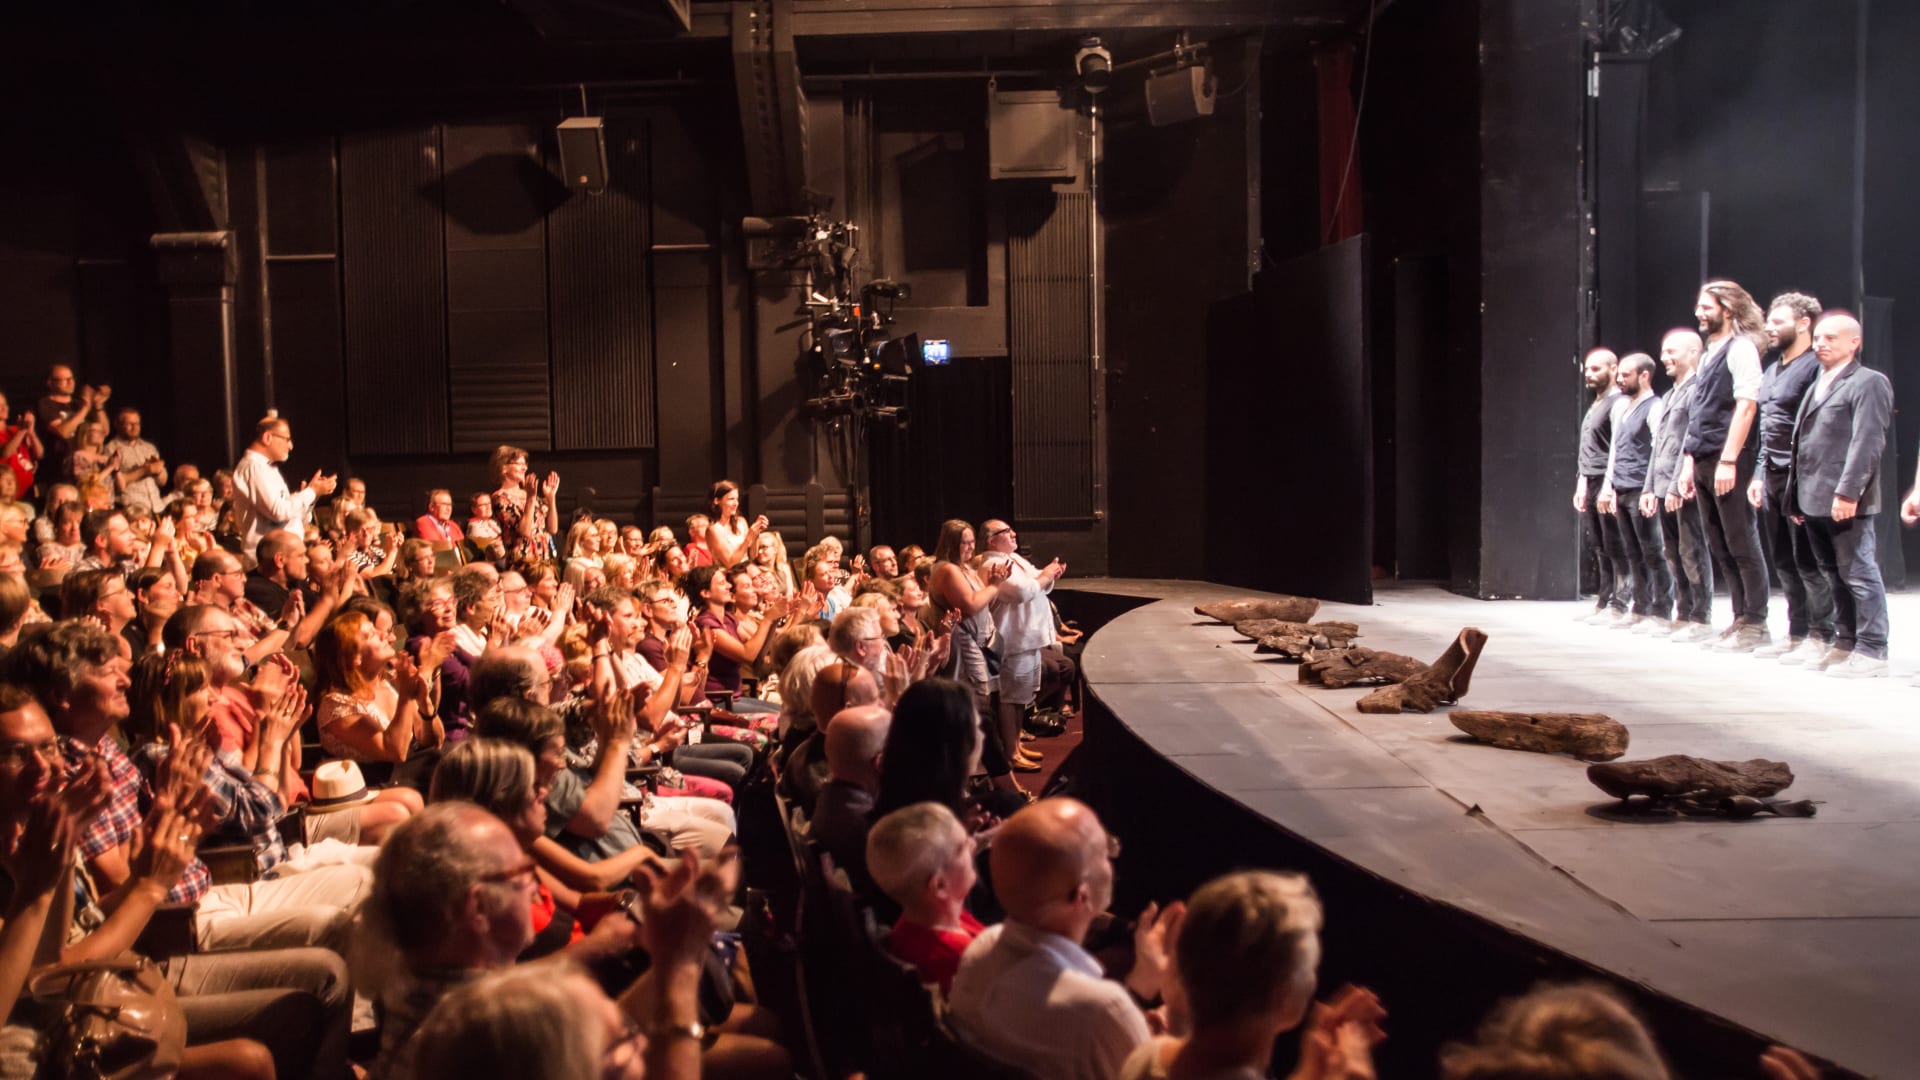 The audience gives applause to the performers of the Macbettu at Tampere Theatre Festival in 2018.